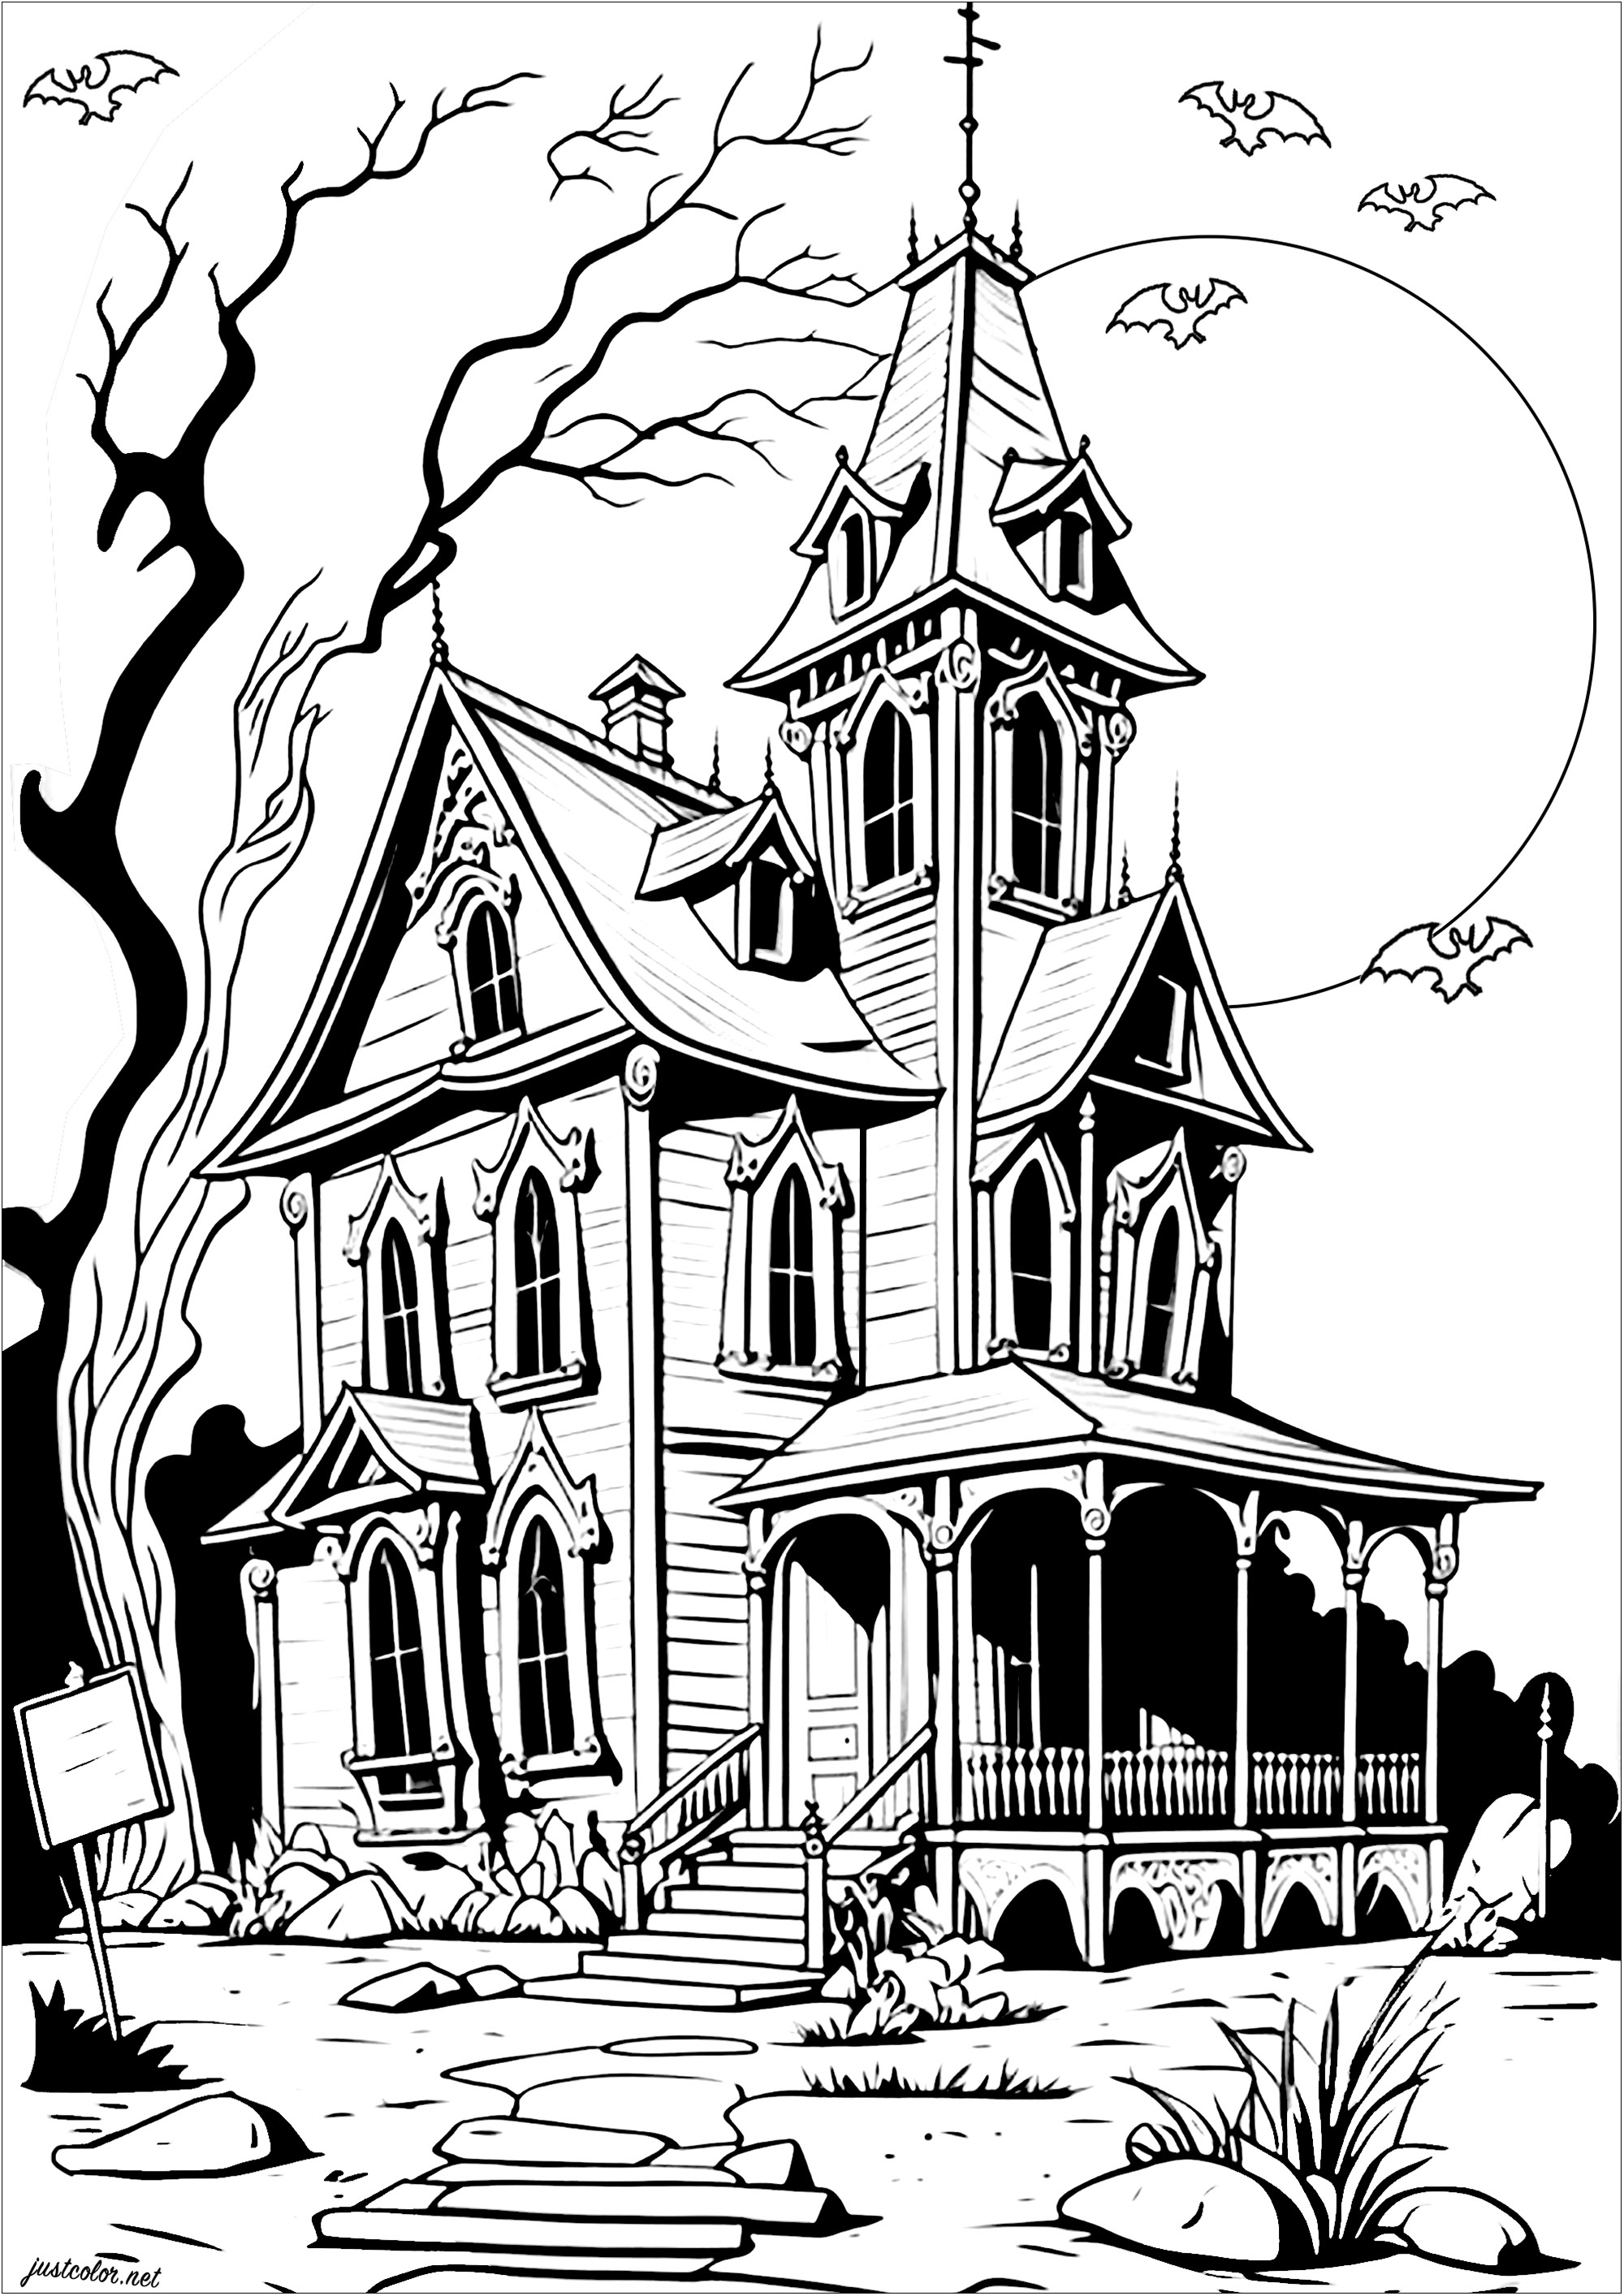 Disney style haunted house - Halloween Adult Coloring Pages - Page page/2/